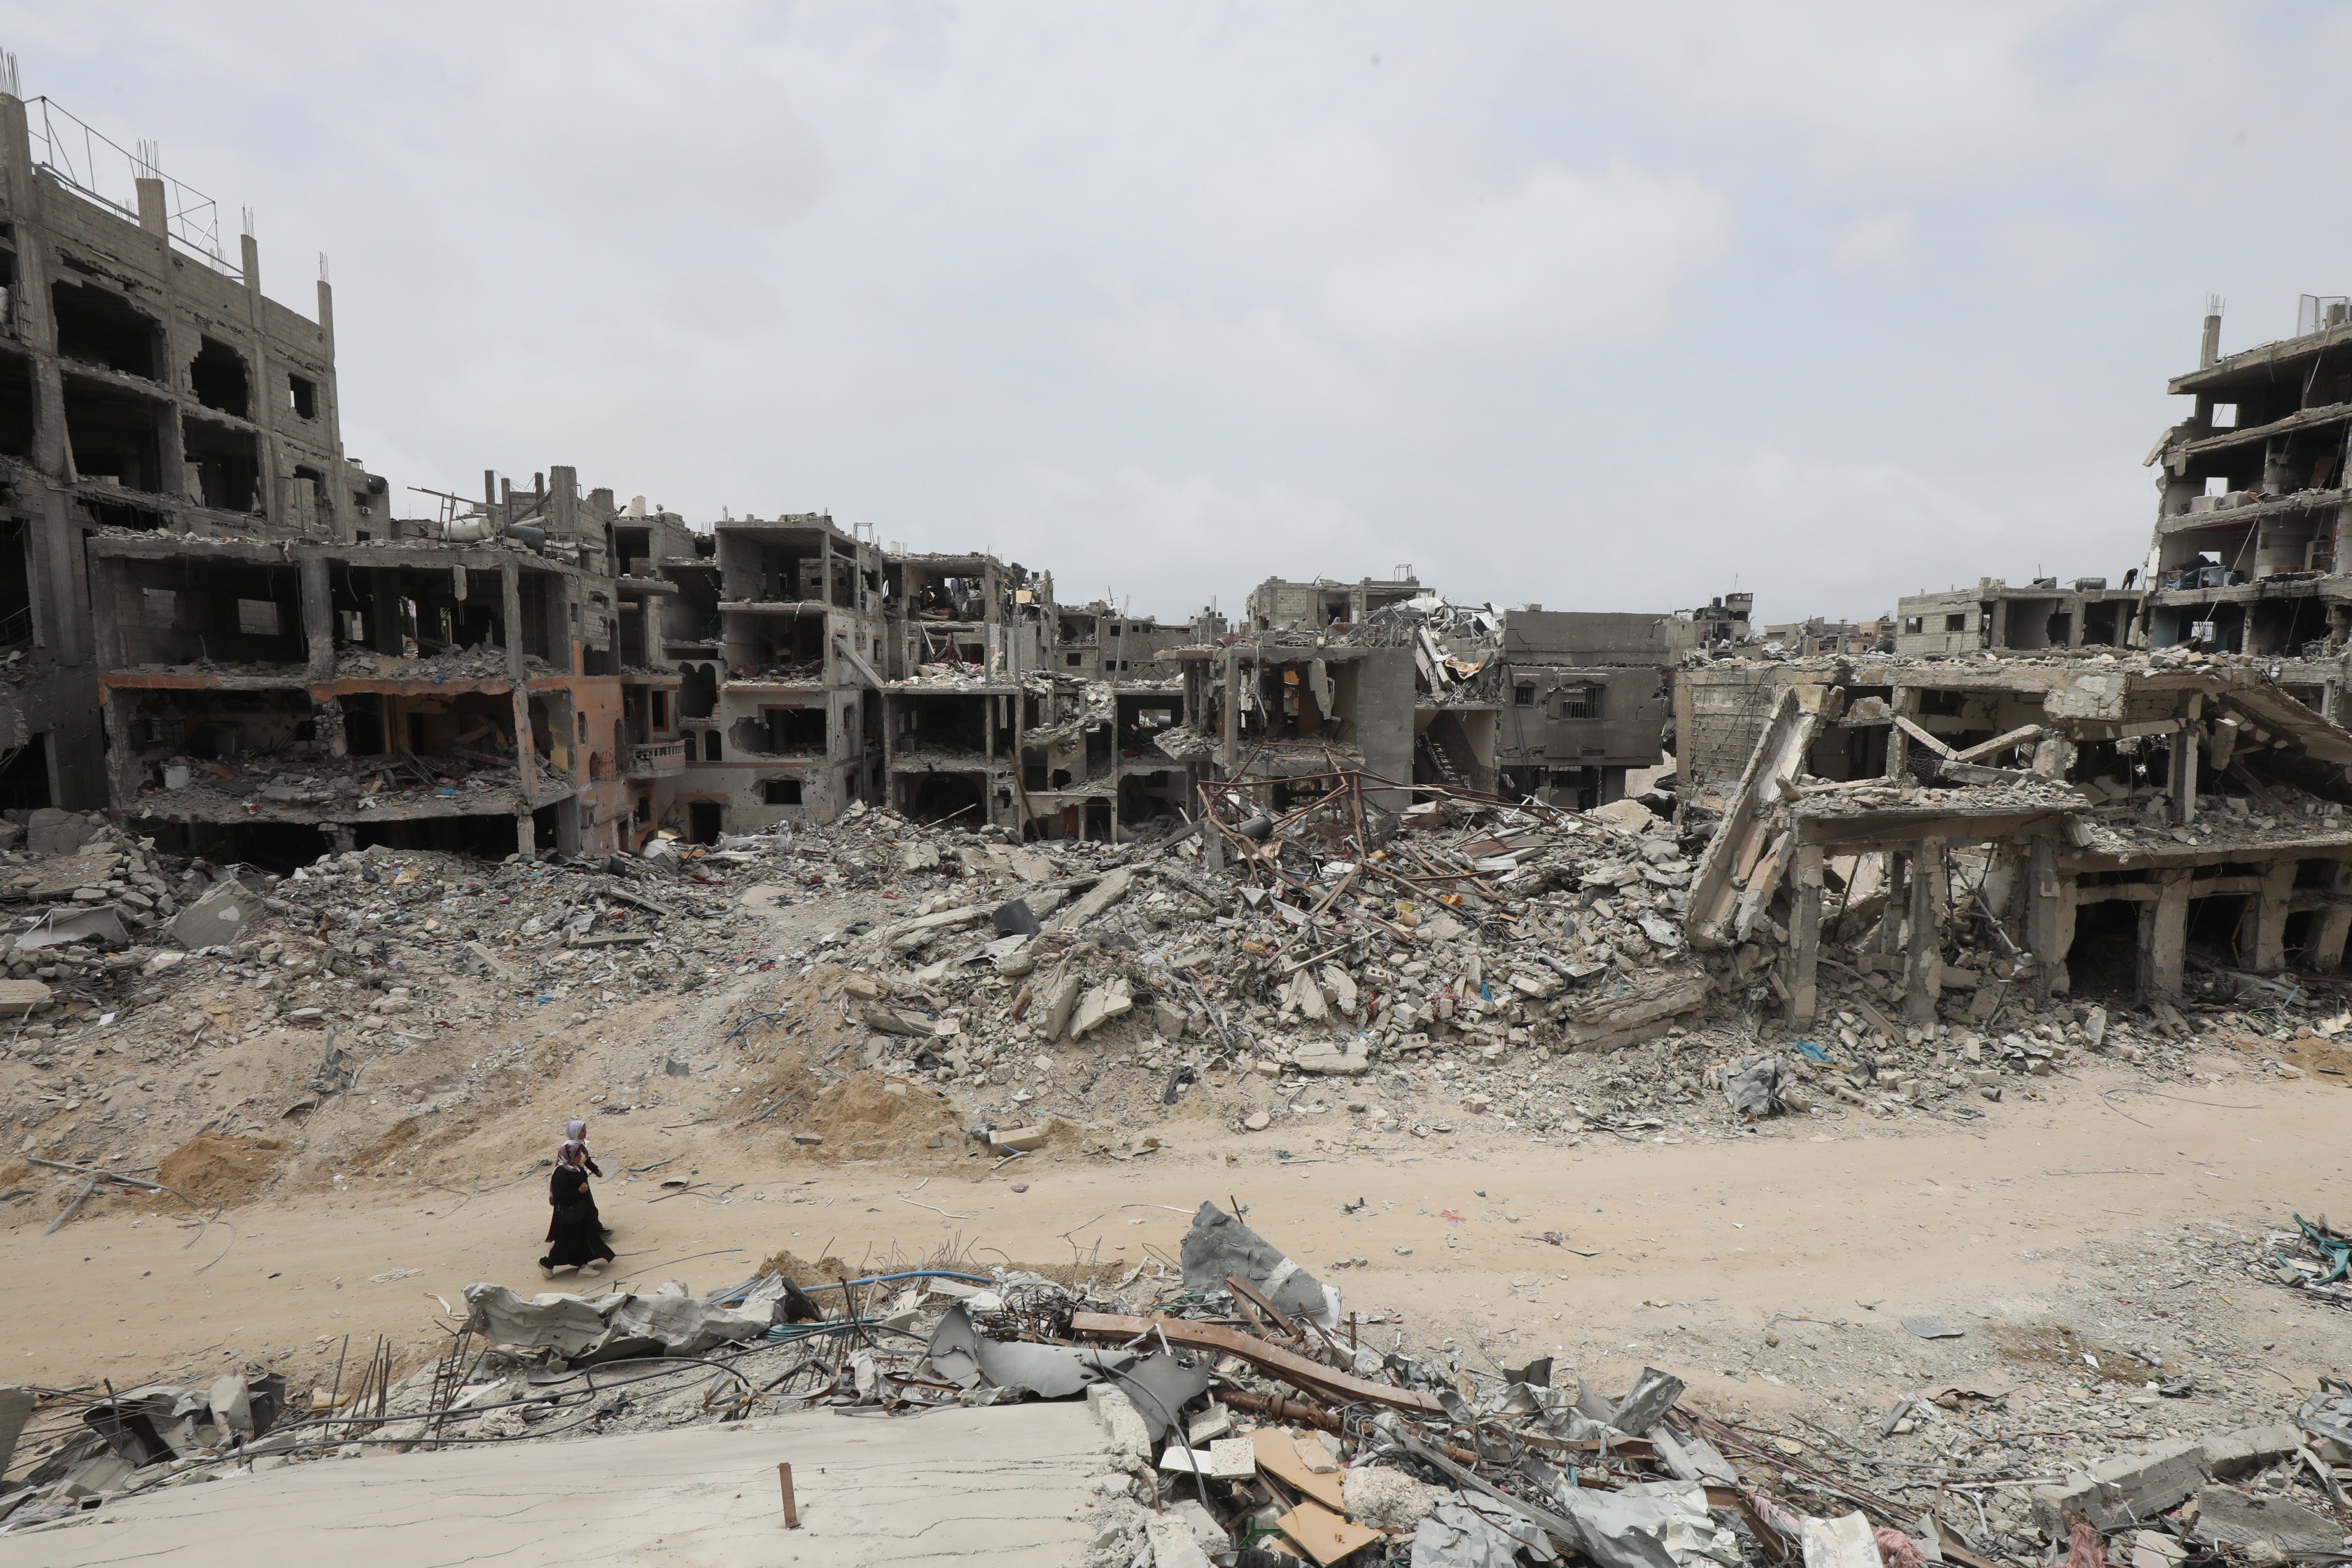 Destroyed buildings and streets in Khan Yunis, southern Gaza. Photo: dpa